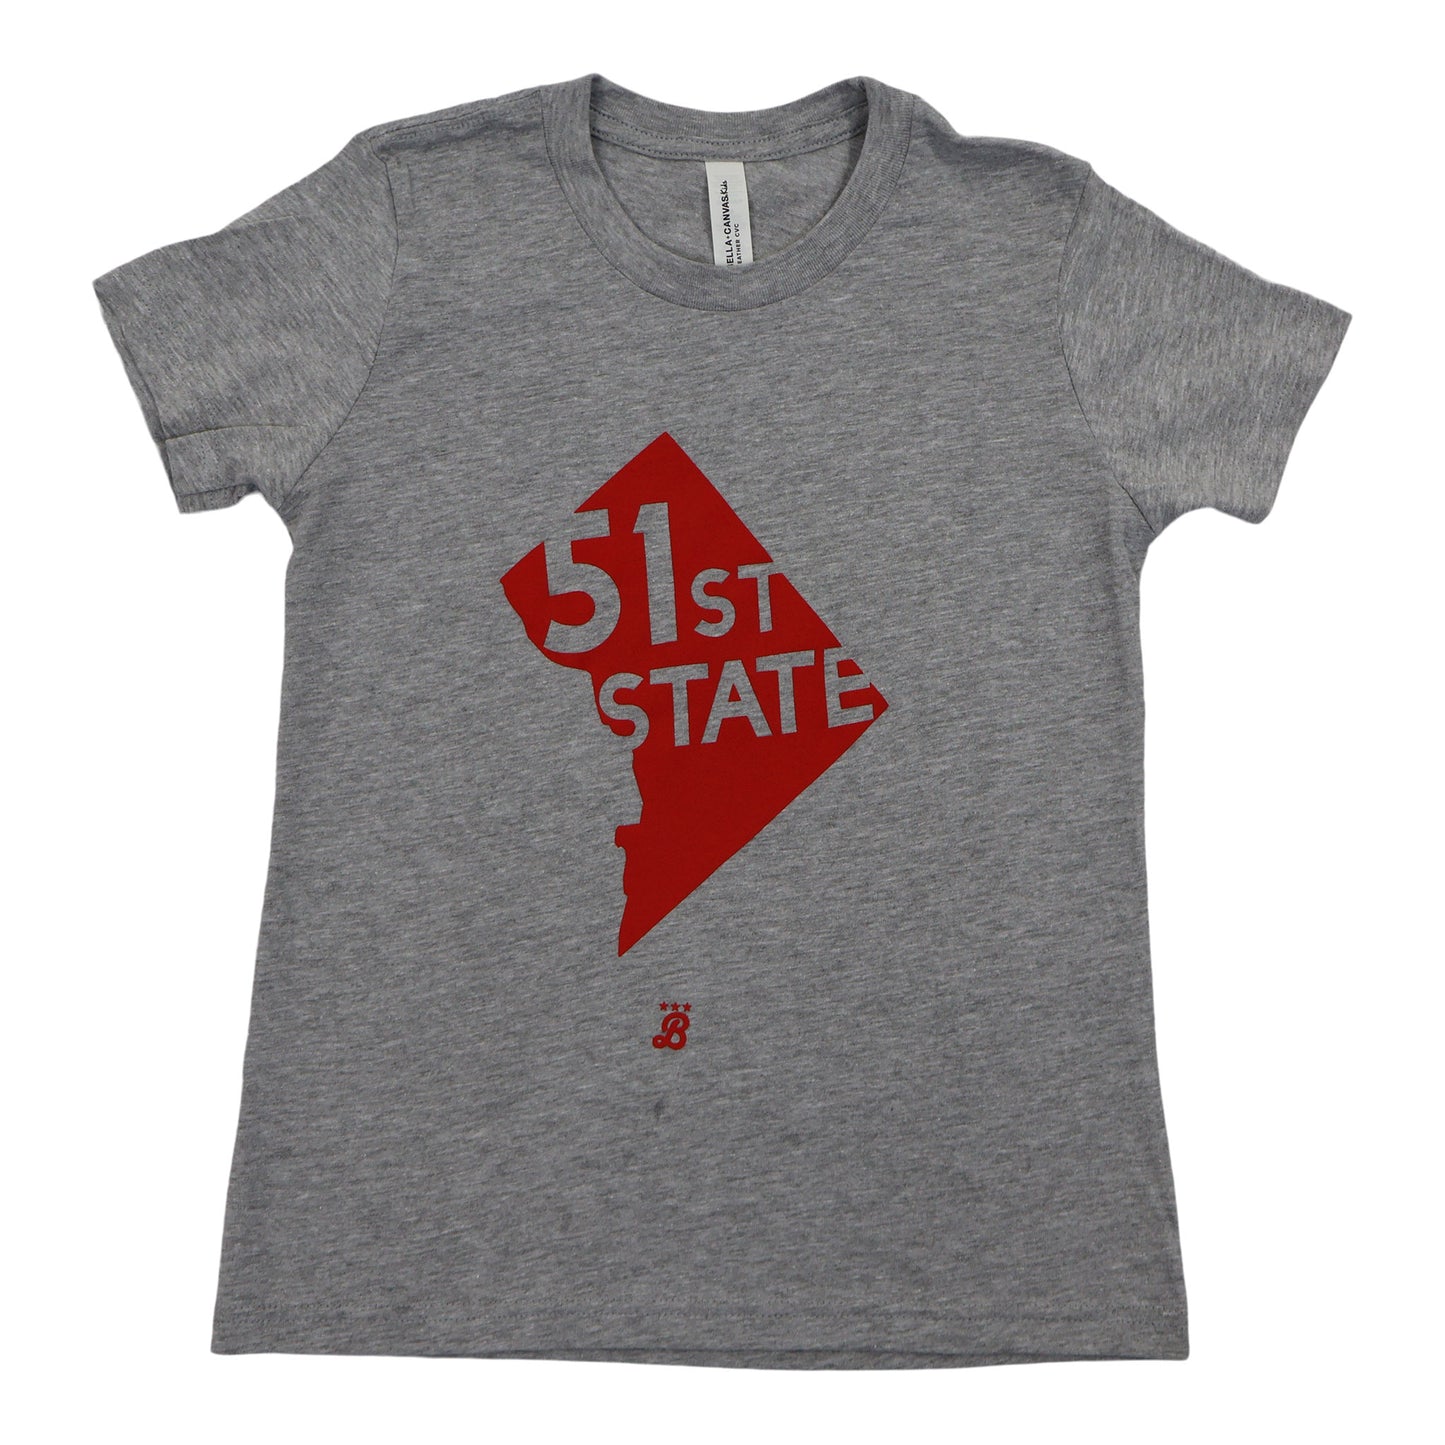 YOUTH - 51st State